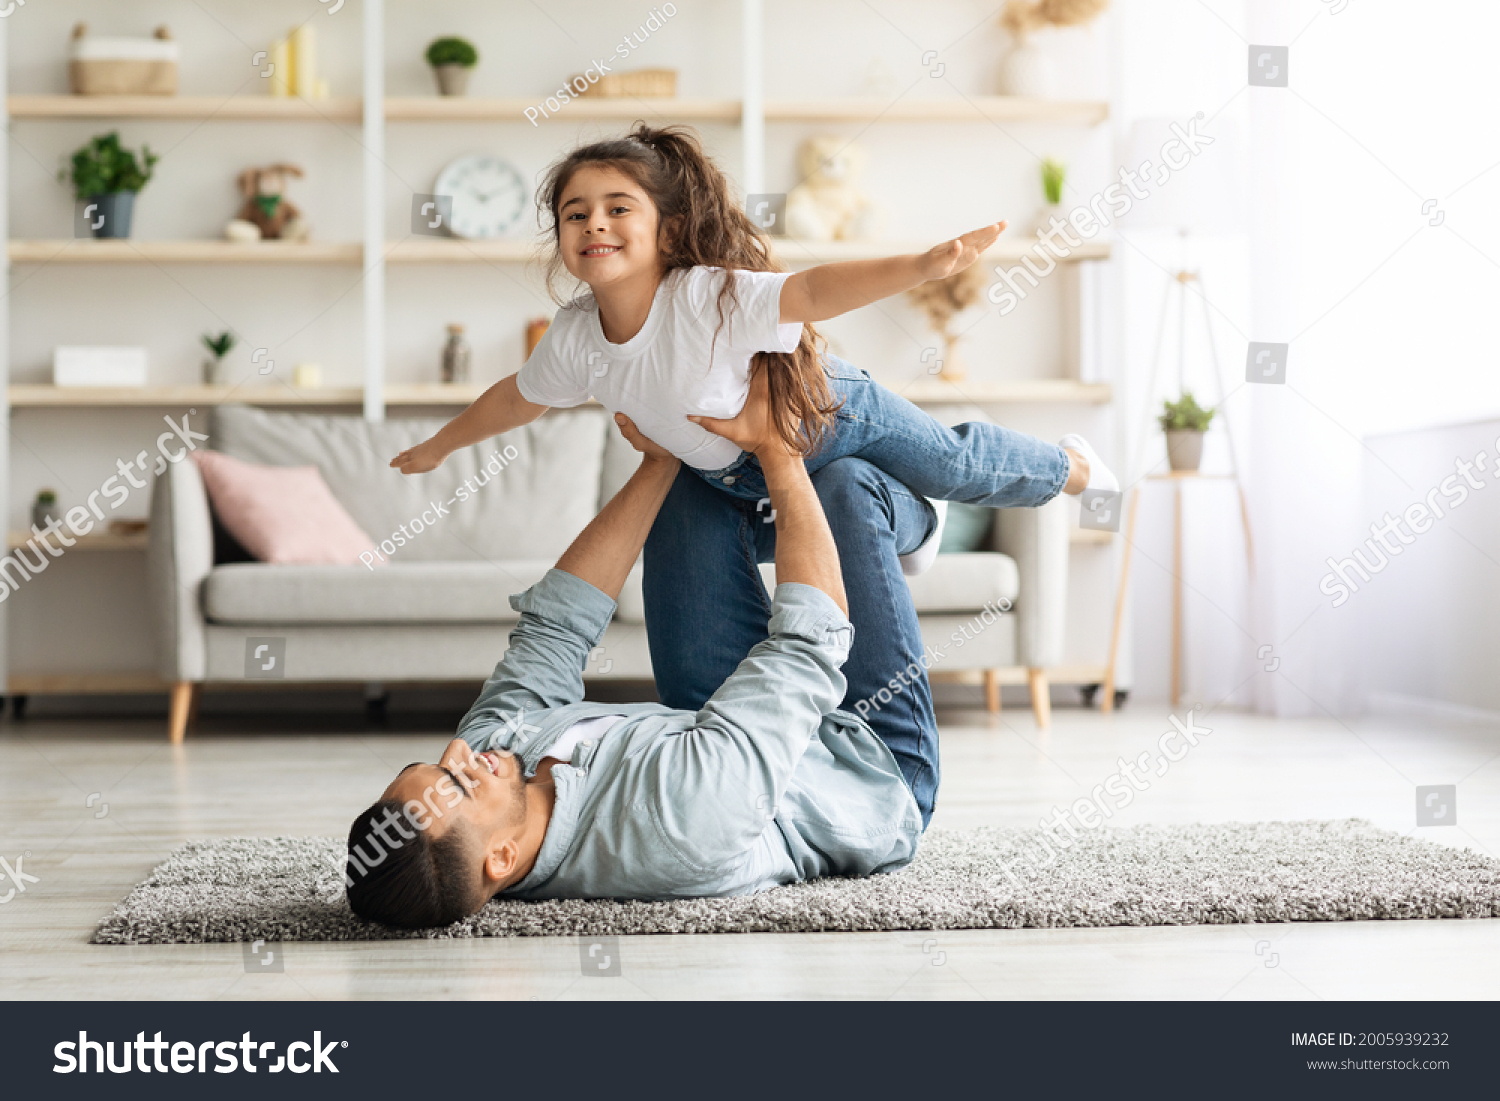 Adorable little curly girl spending time with her daddy at home, middle-eastern young man father playing airplane with his cute daughter, laying on floor in living room, lifting kid up, copy space #2005939232